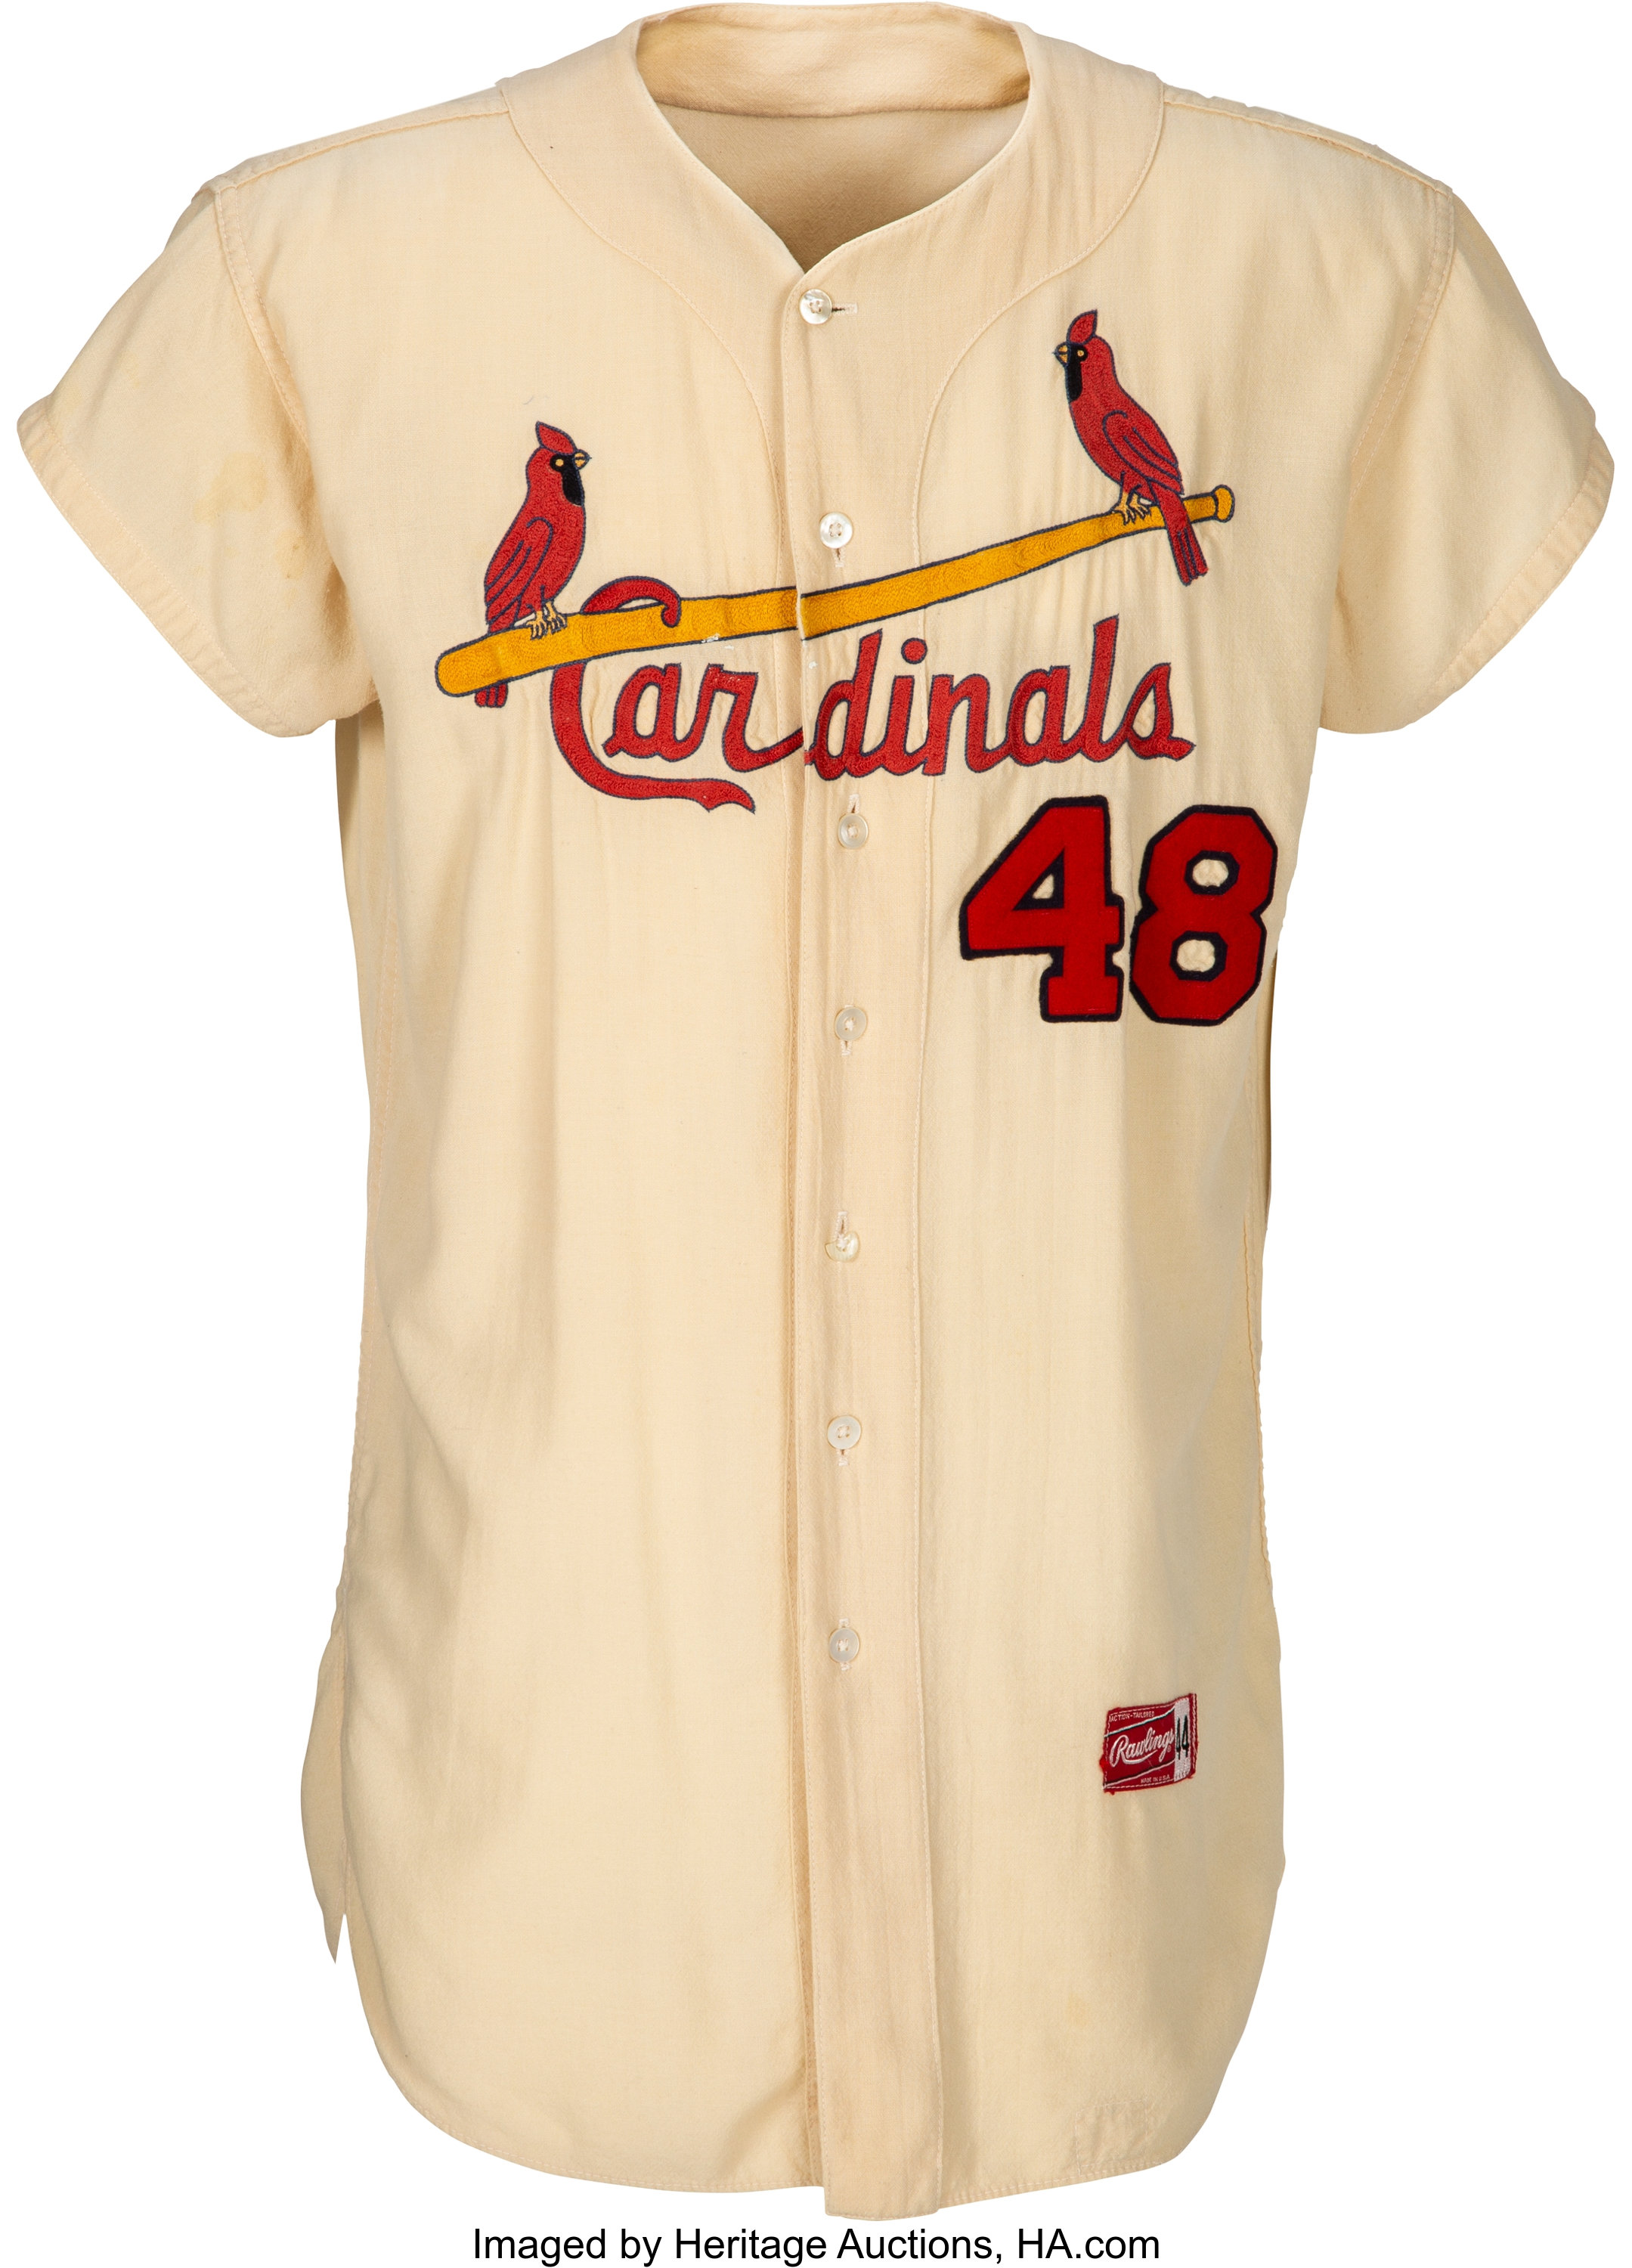 St. Louis Cardinals 48 Size MLB Jerseys for sale